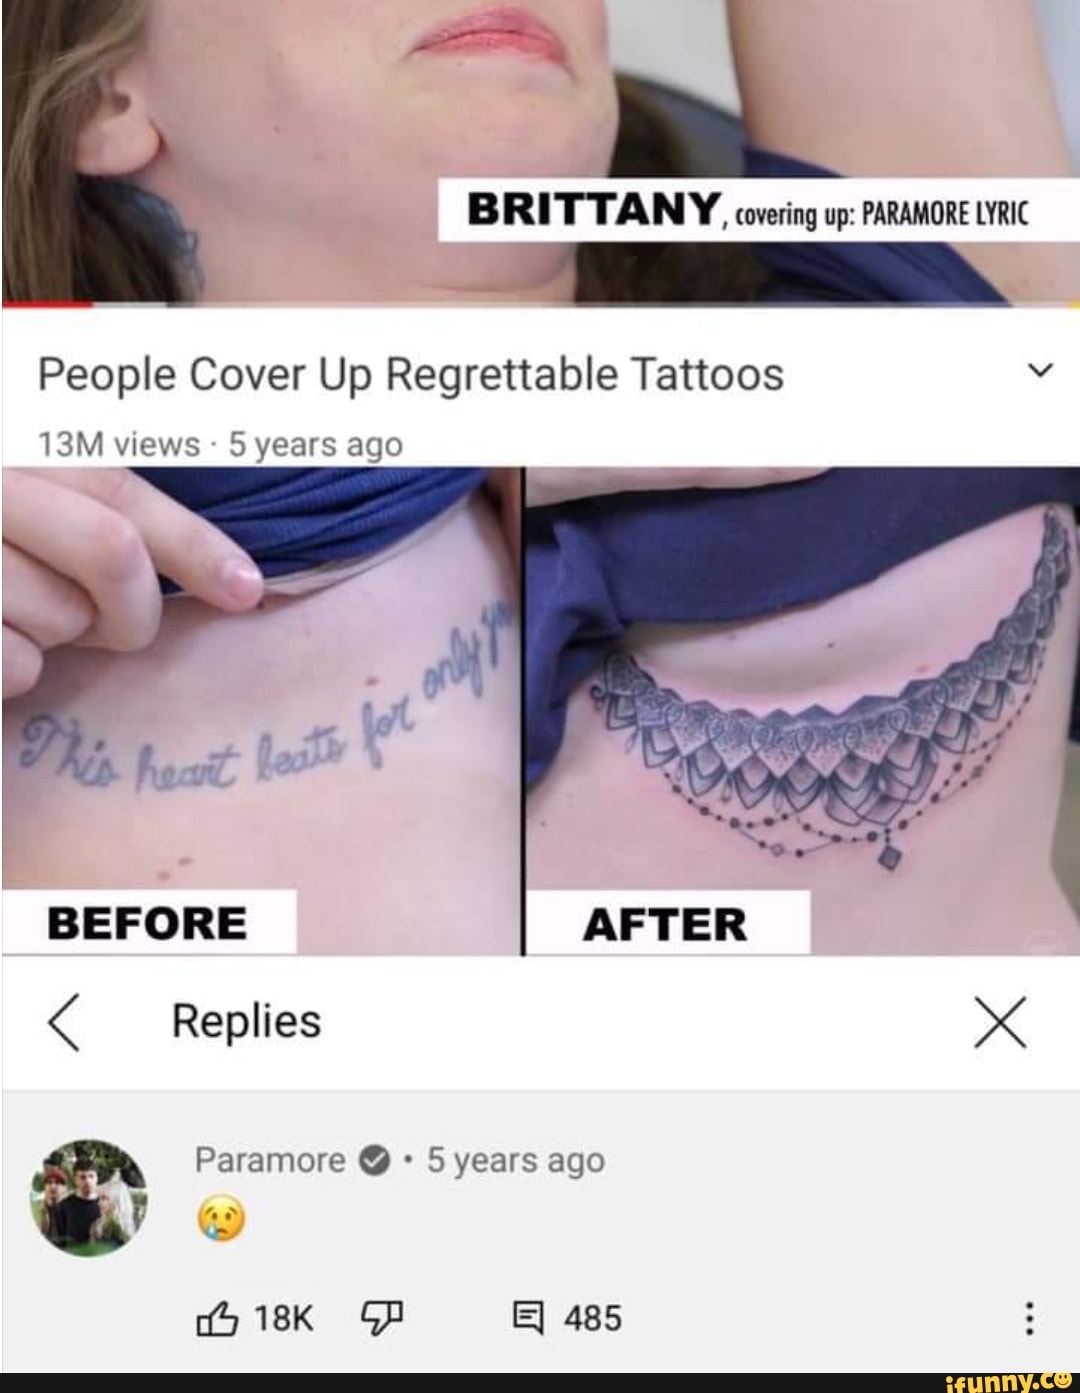 BRITTANY, covering up: PARAMORE LYRIC People Cover Up Regrettable